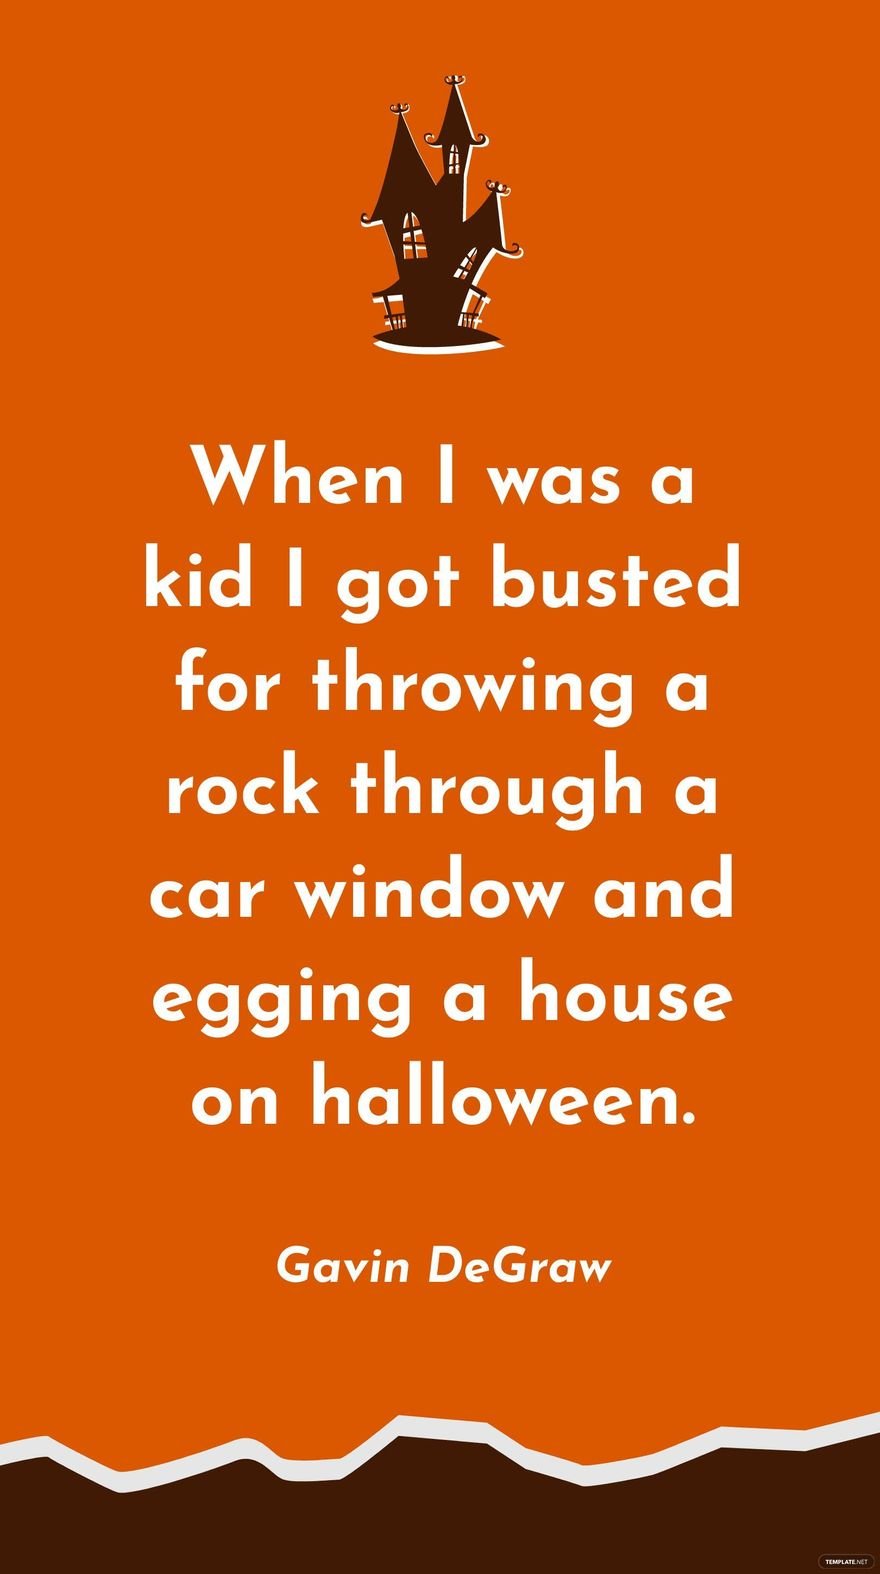 Gavin DeGraw - When I was a kid I got busted for throwing a rock through a car window and egging a house on halloween. in JPG